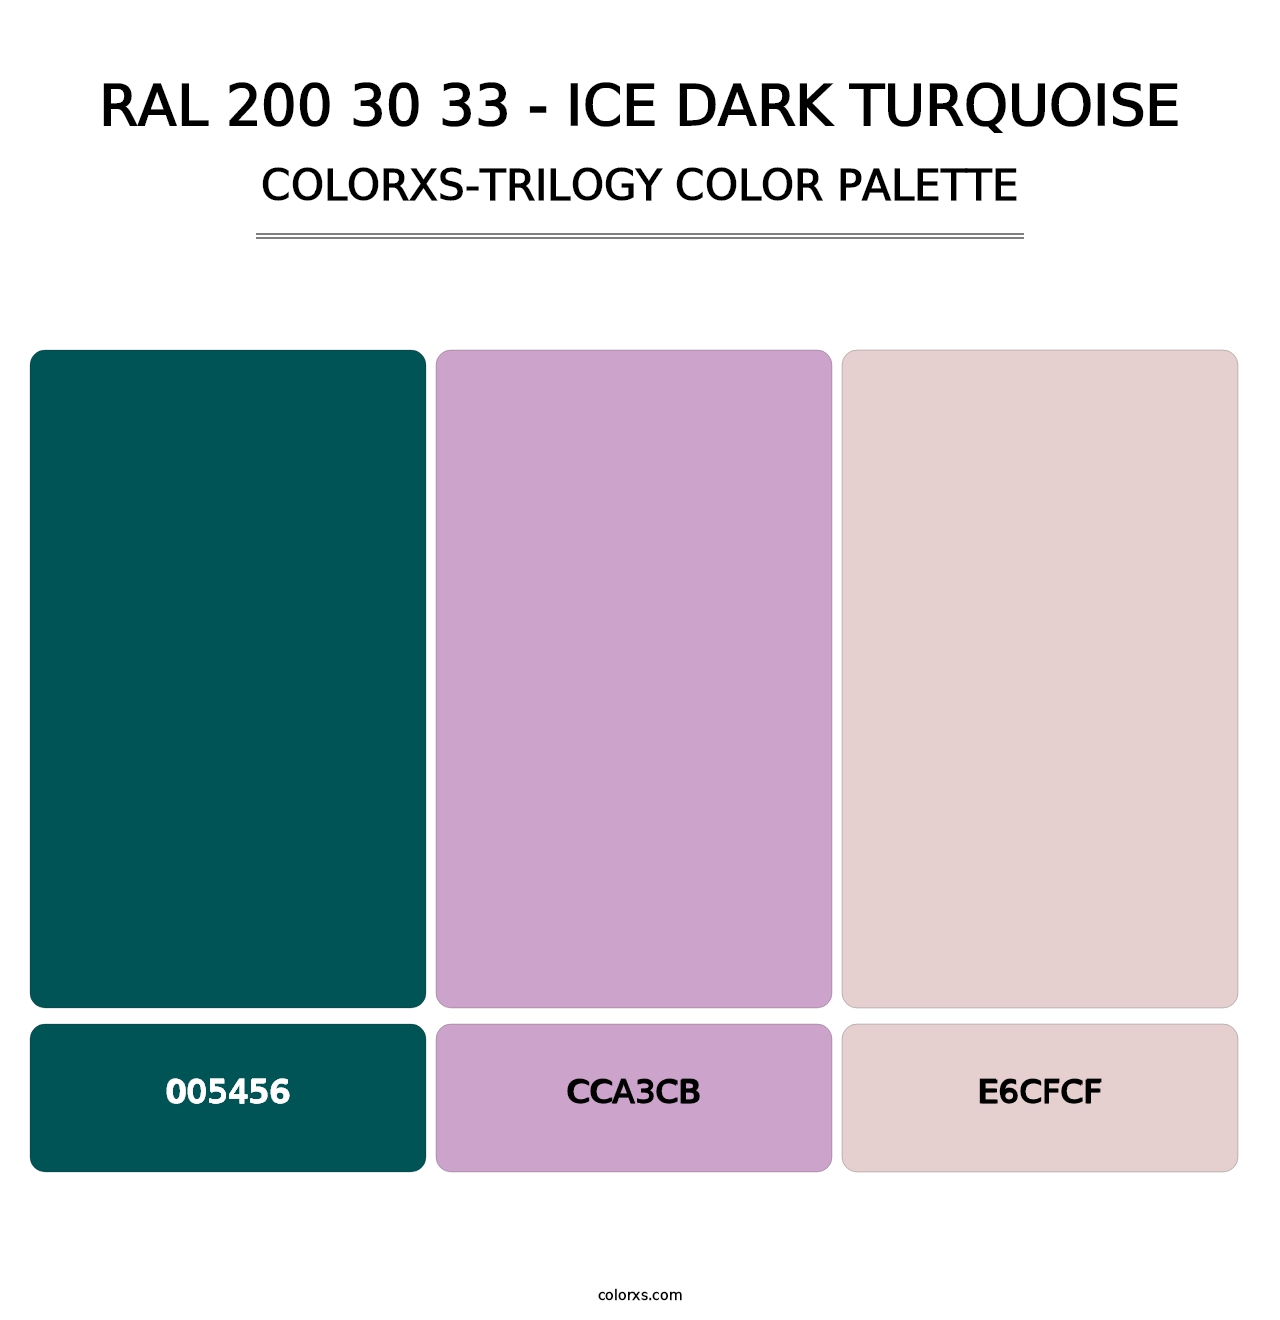 RAL 200 30 33 - Ice Dark Turquoise - Colorxs Trilogy Palette